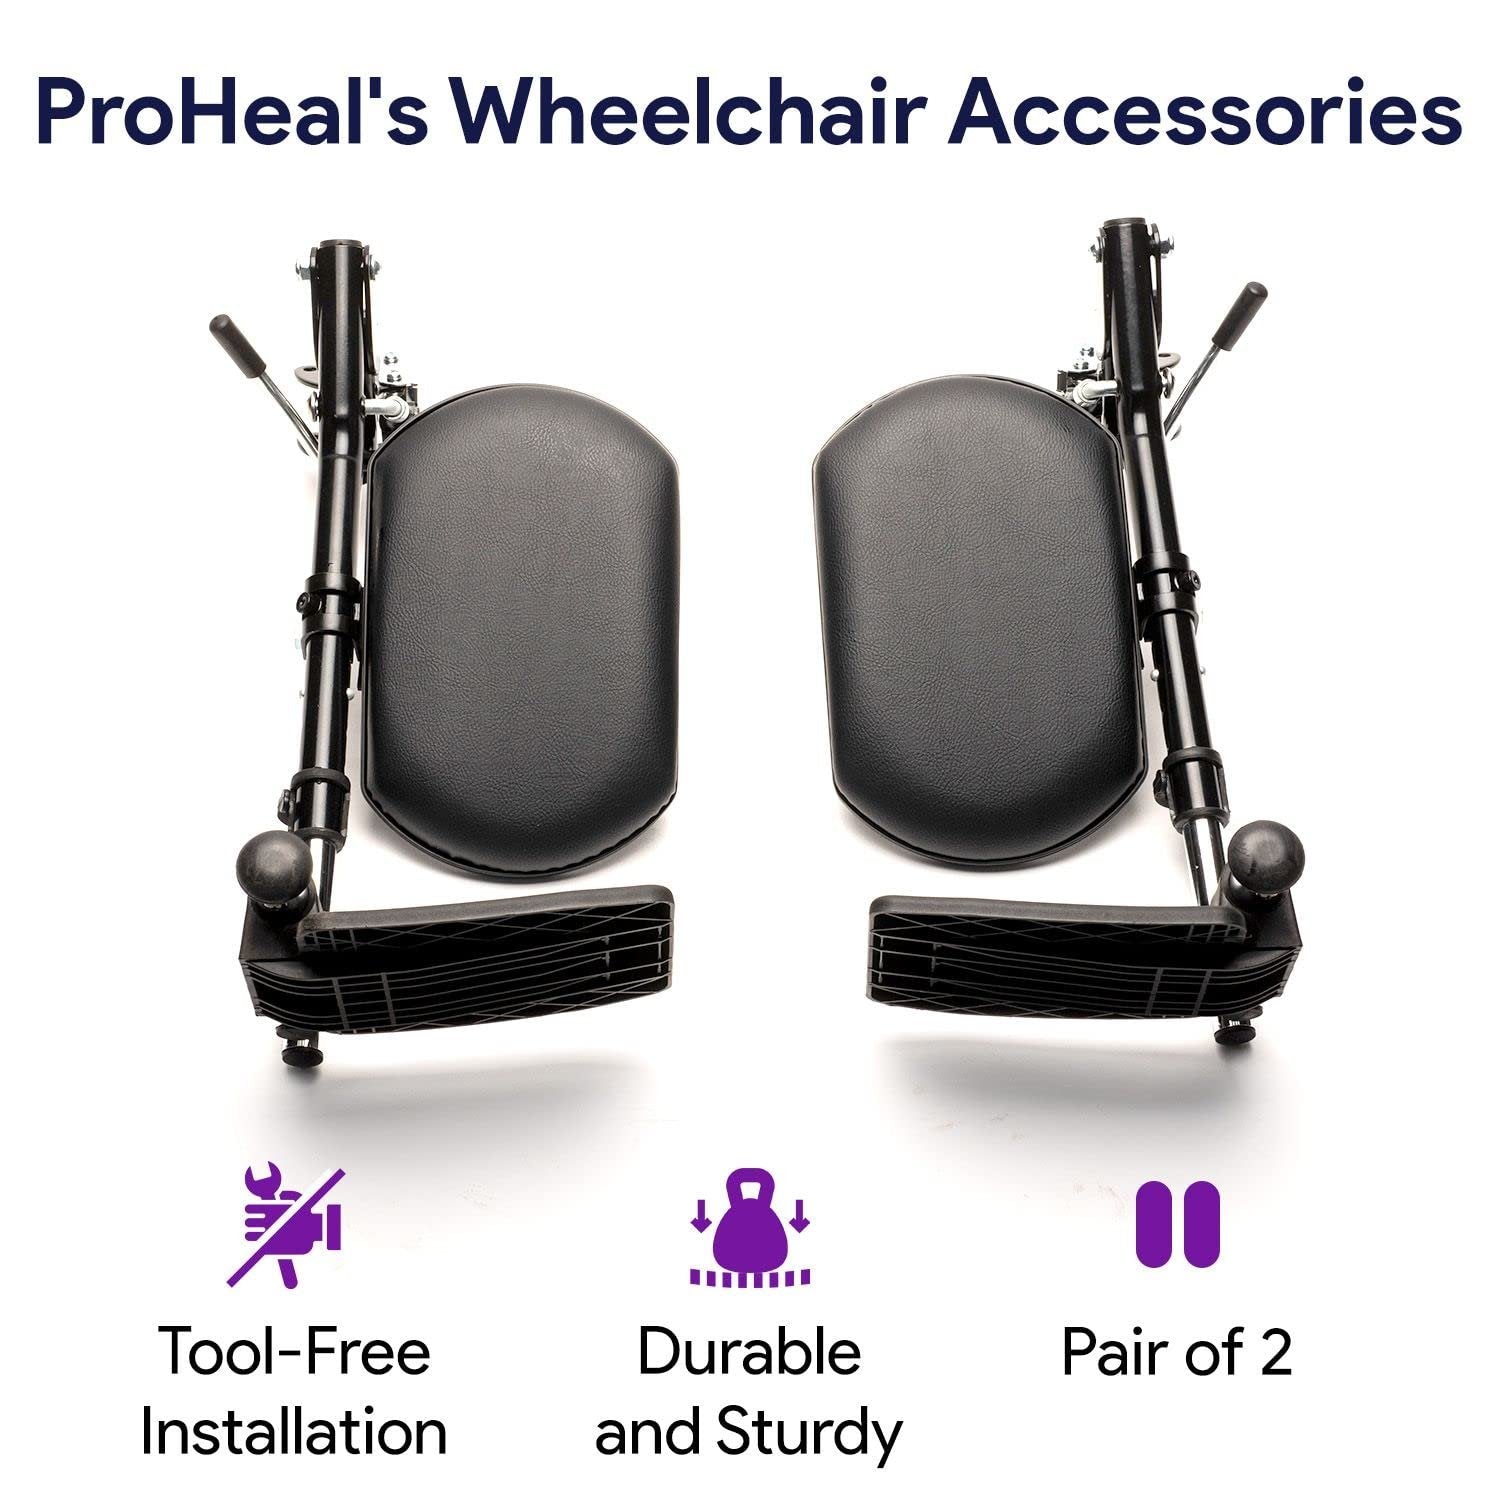 Elevating Wheelchair Leg Rest - Elevated Foot Rest with Wheelchair Calf Support - Leg Pressure Distribution - Supreme Comfort Up to 180 Degrees